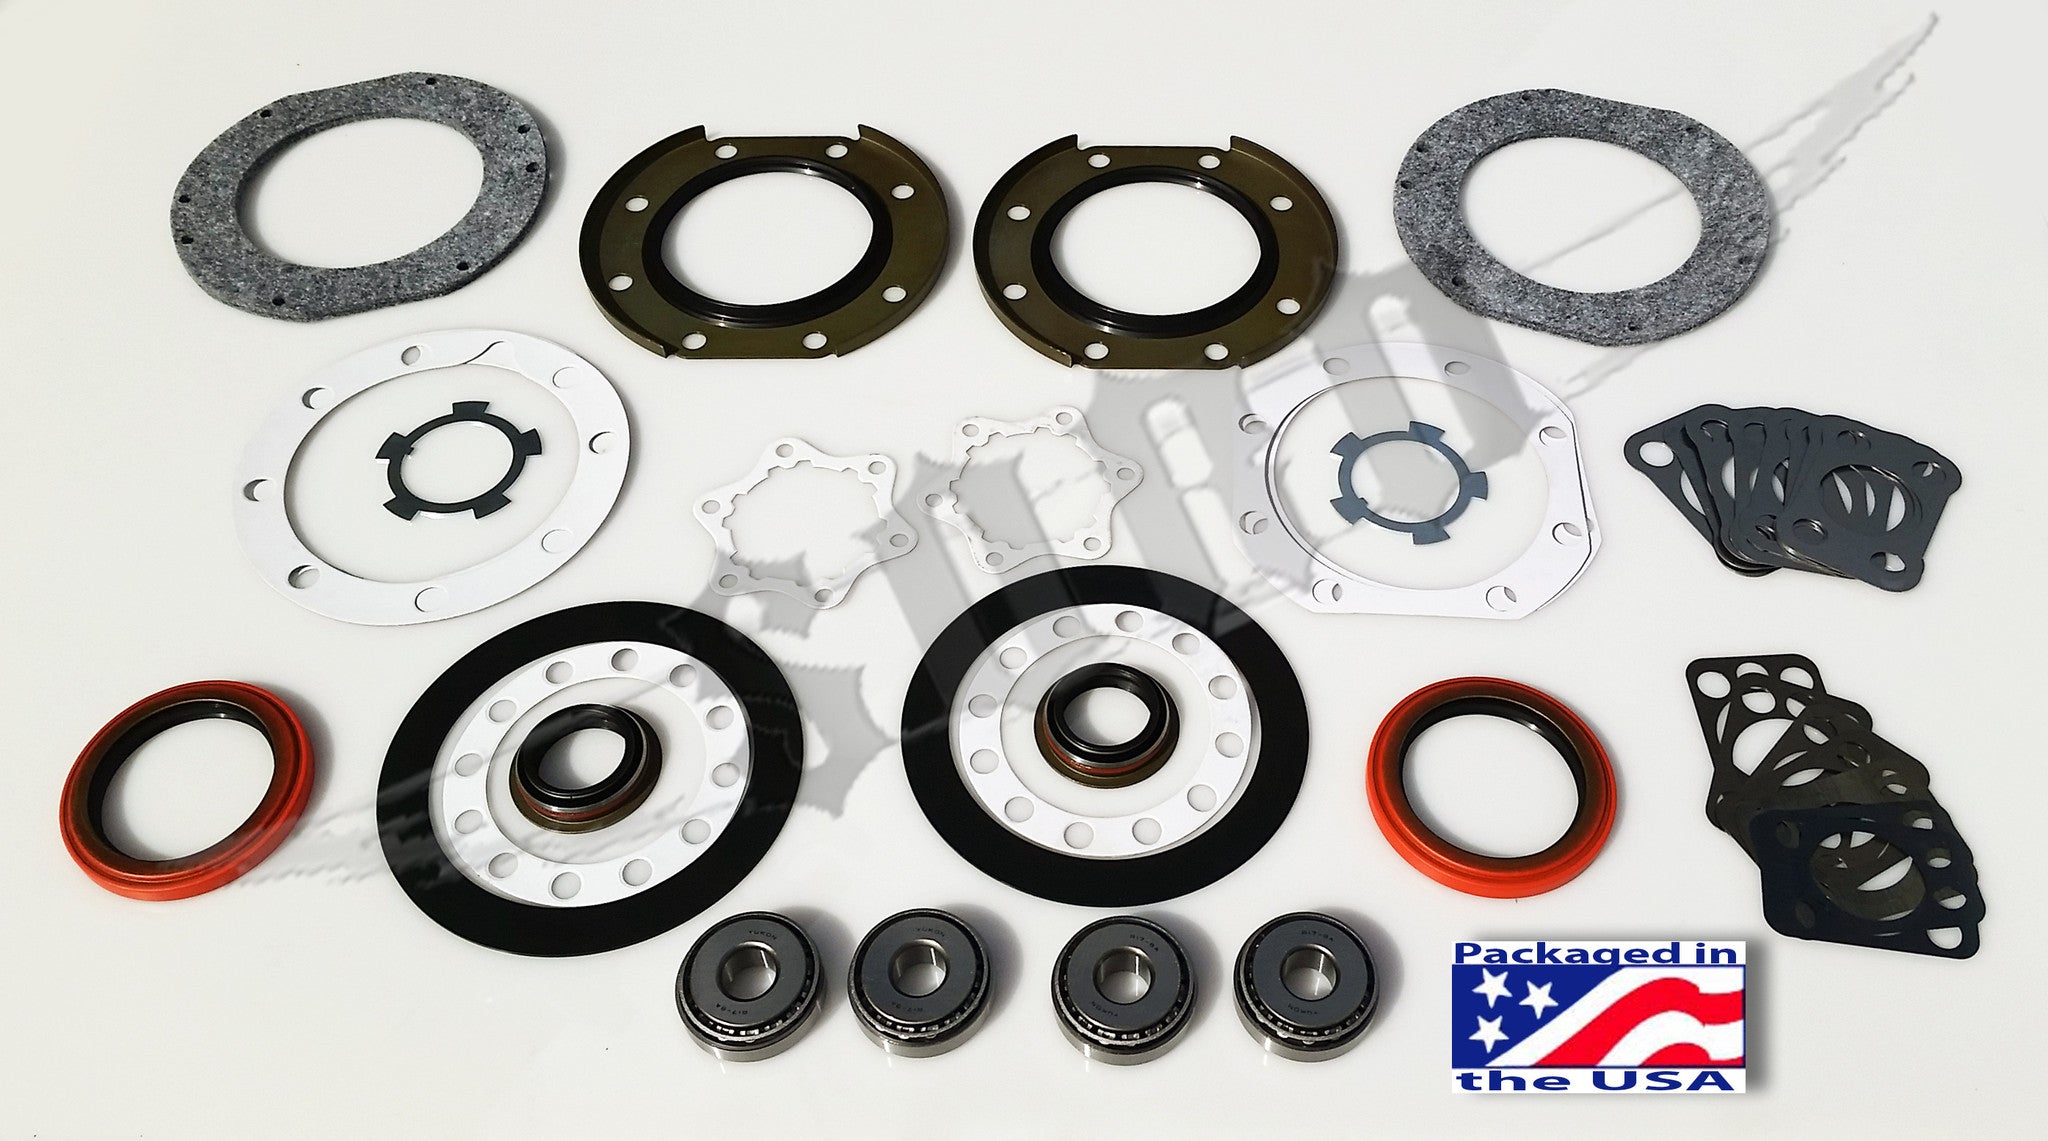 Toyota Solid Axle Knuckle Kingpin Rebuild Kit Sky Manufacturing